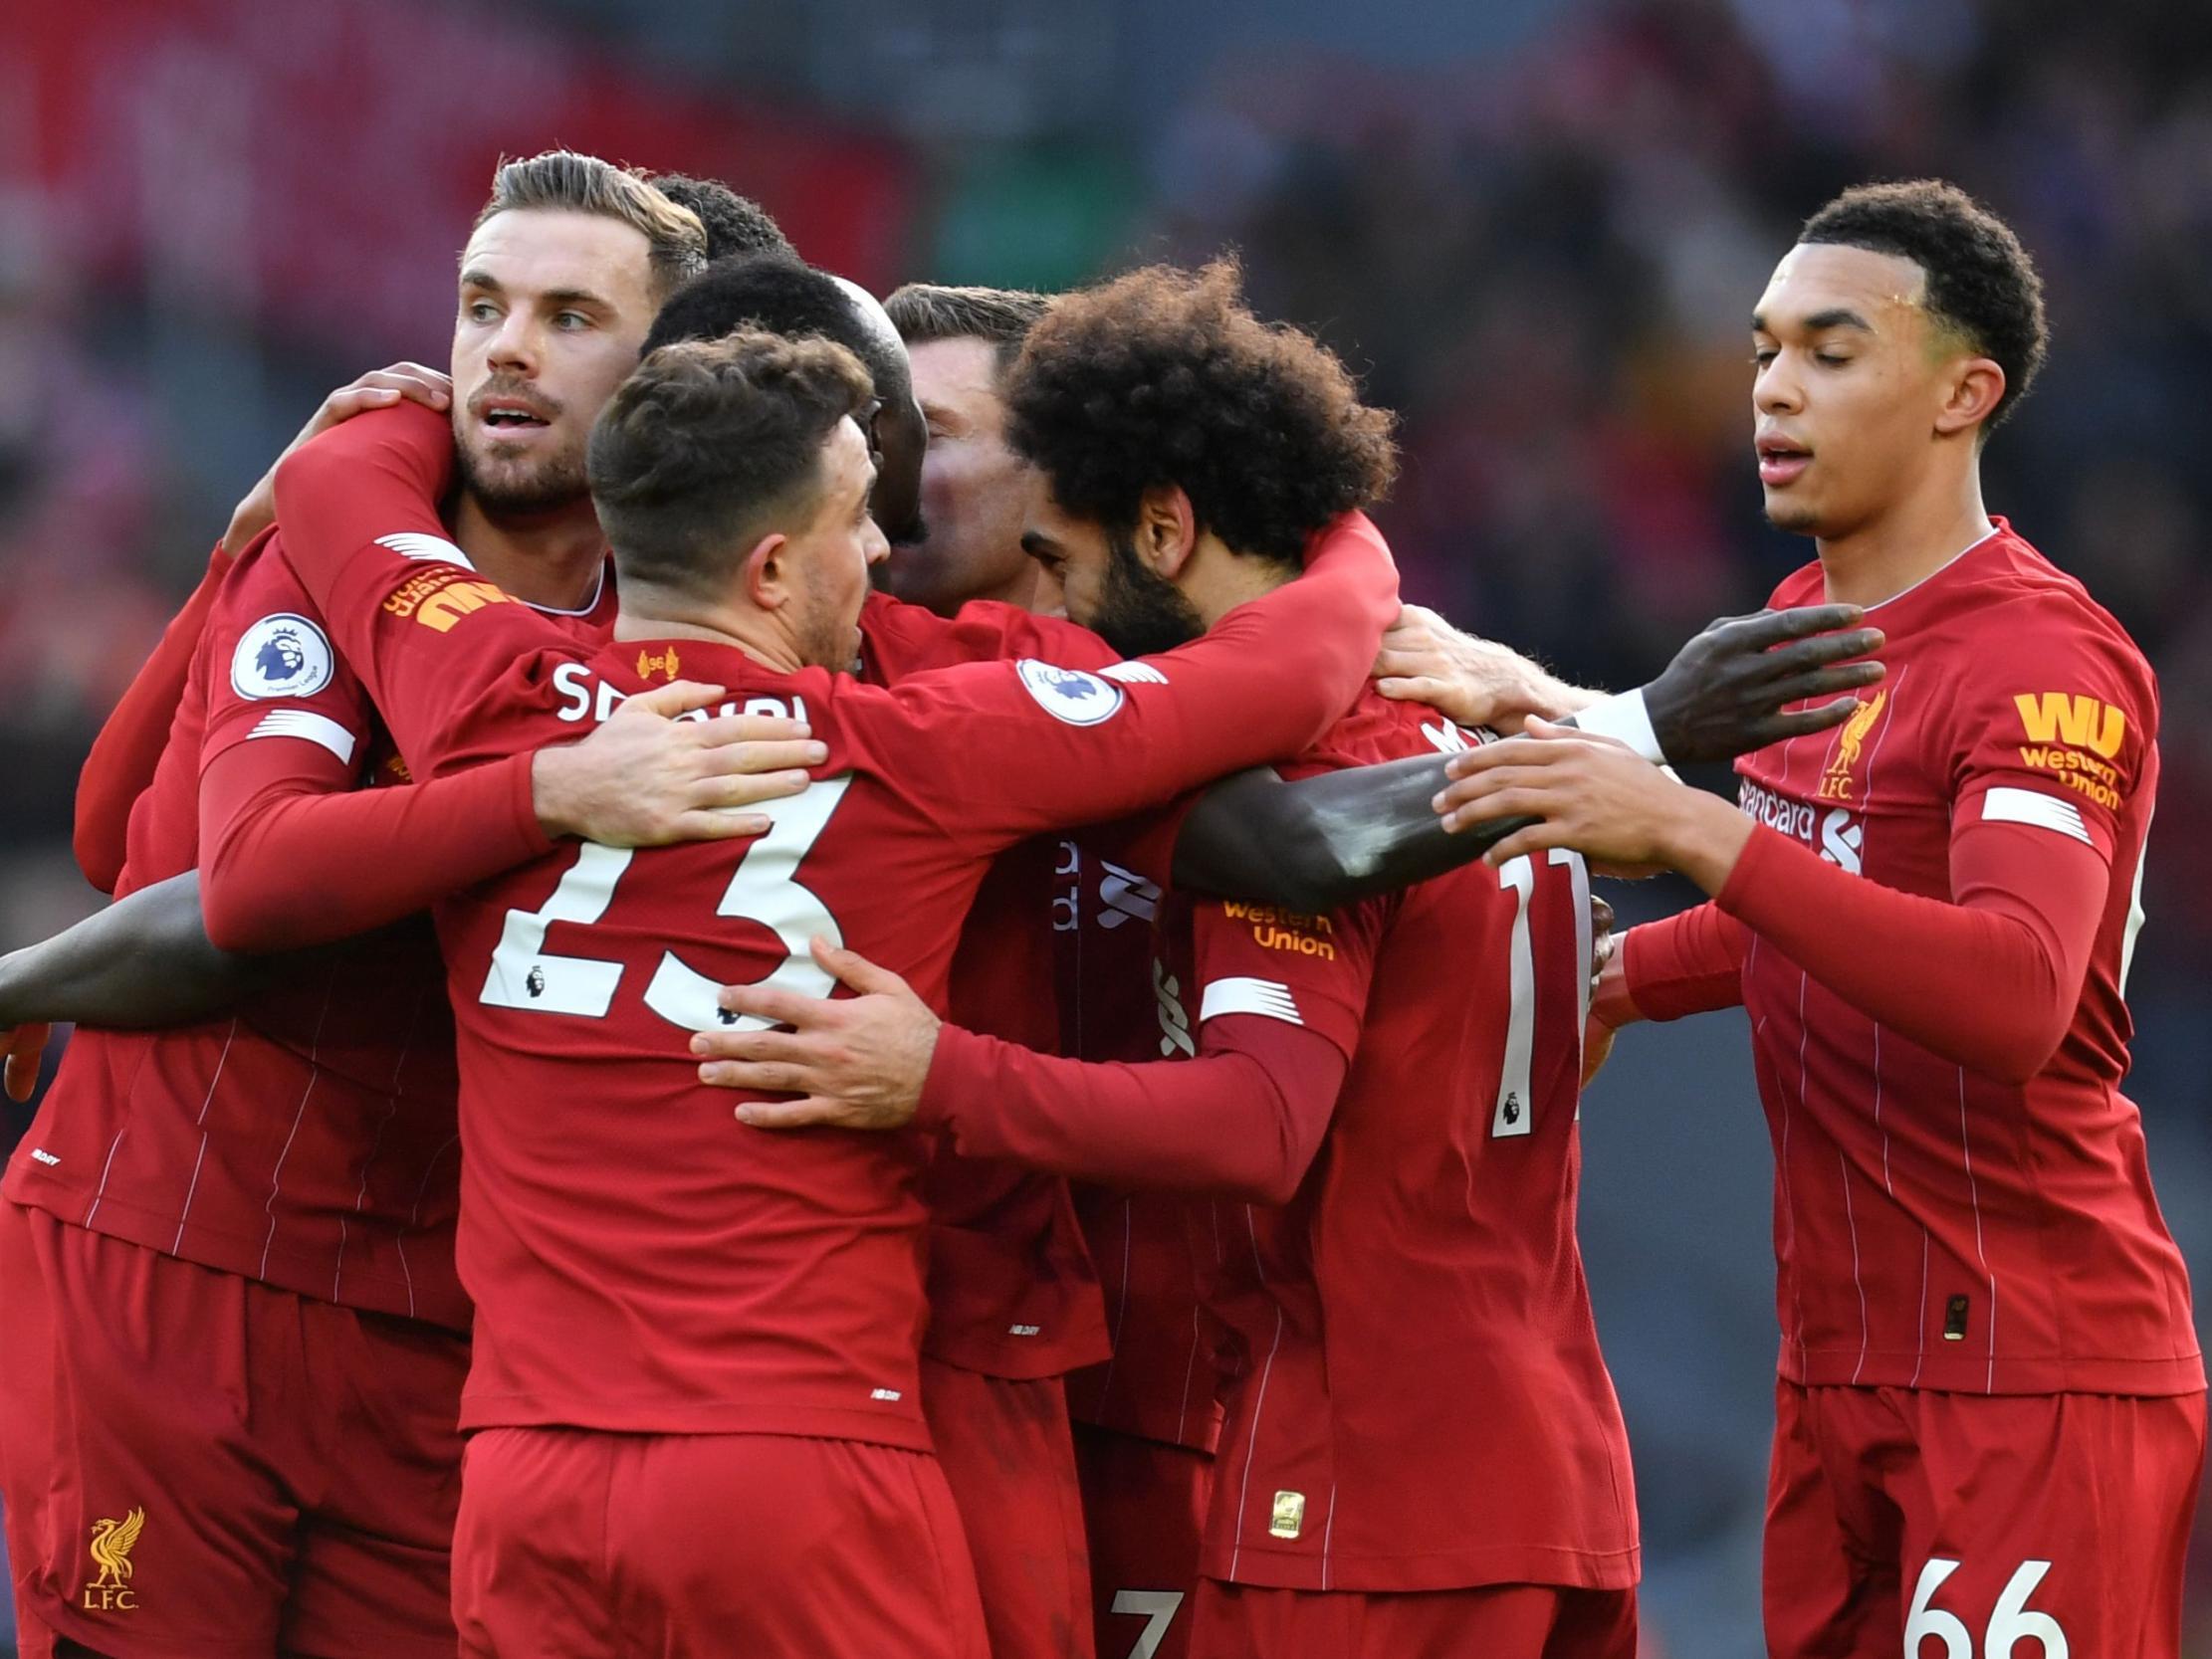 Liverpool are on the brink of first league title in 30 years